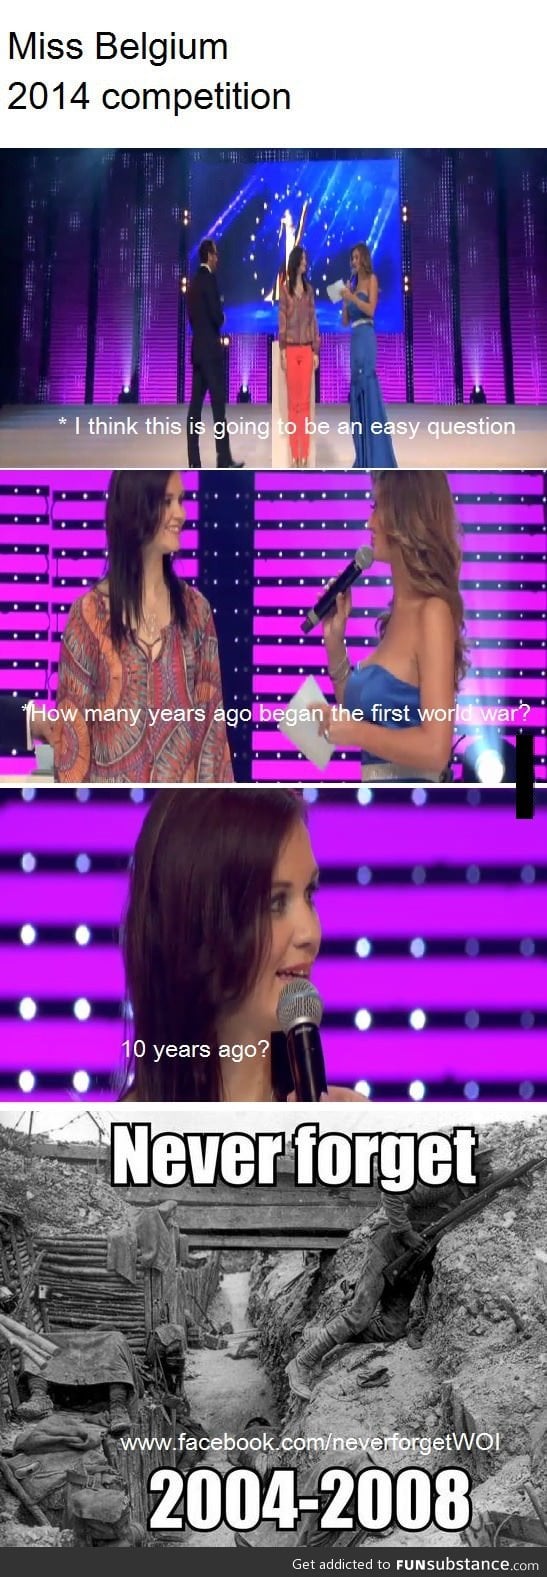 The great knowledge of a miss Belgium